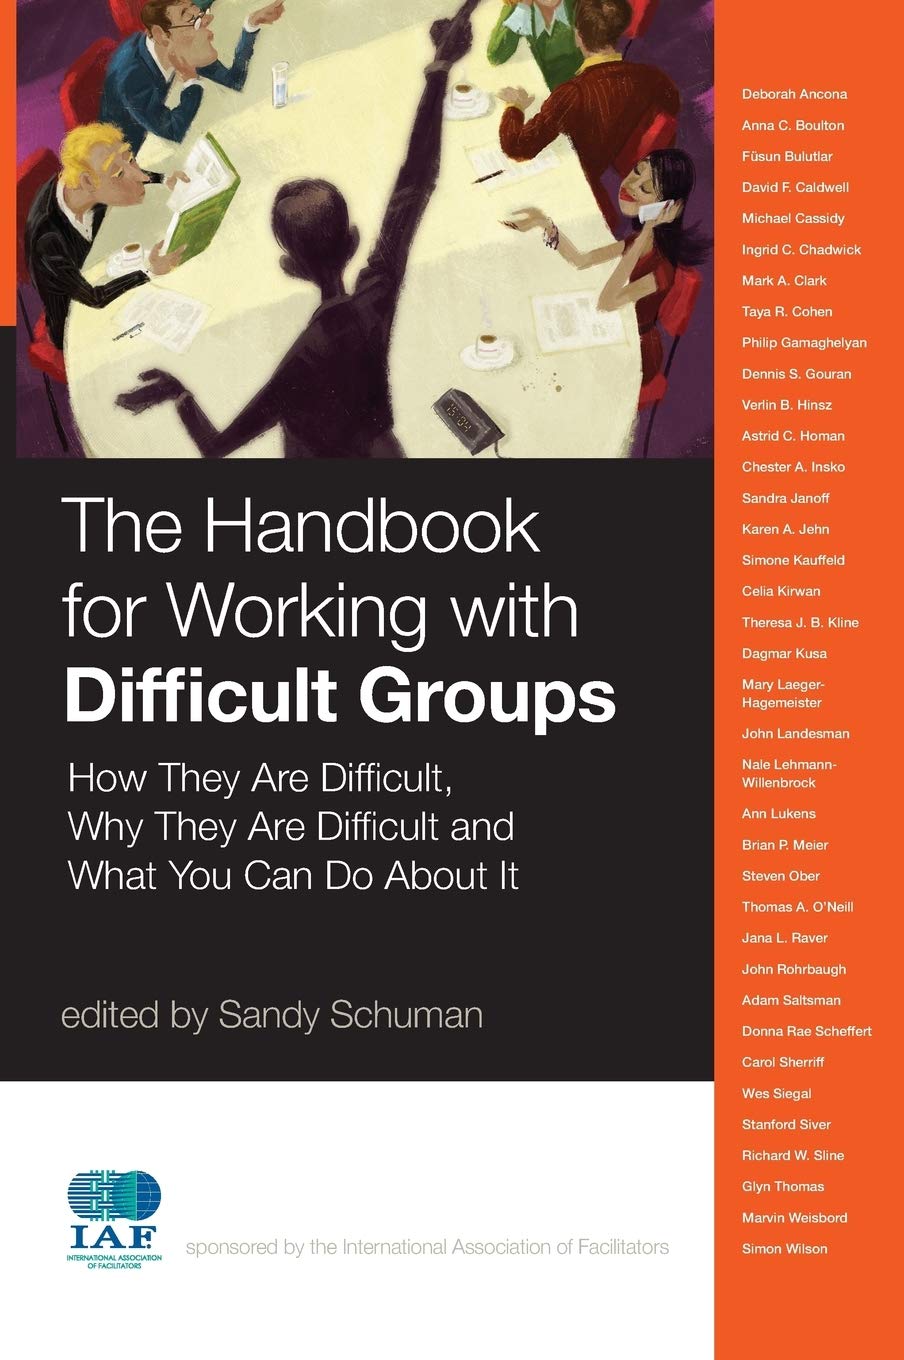 The Handbook for Working with Difficult Groups: How They Are Difficult, Why They Are Difficult and What You Can Do About It